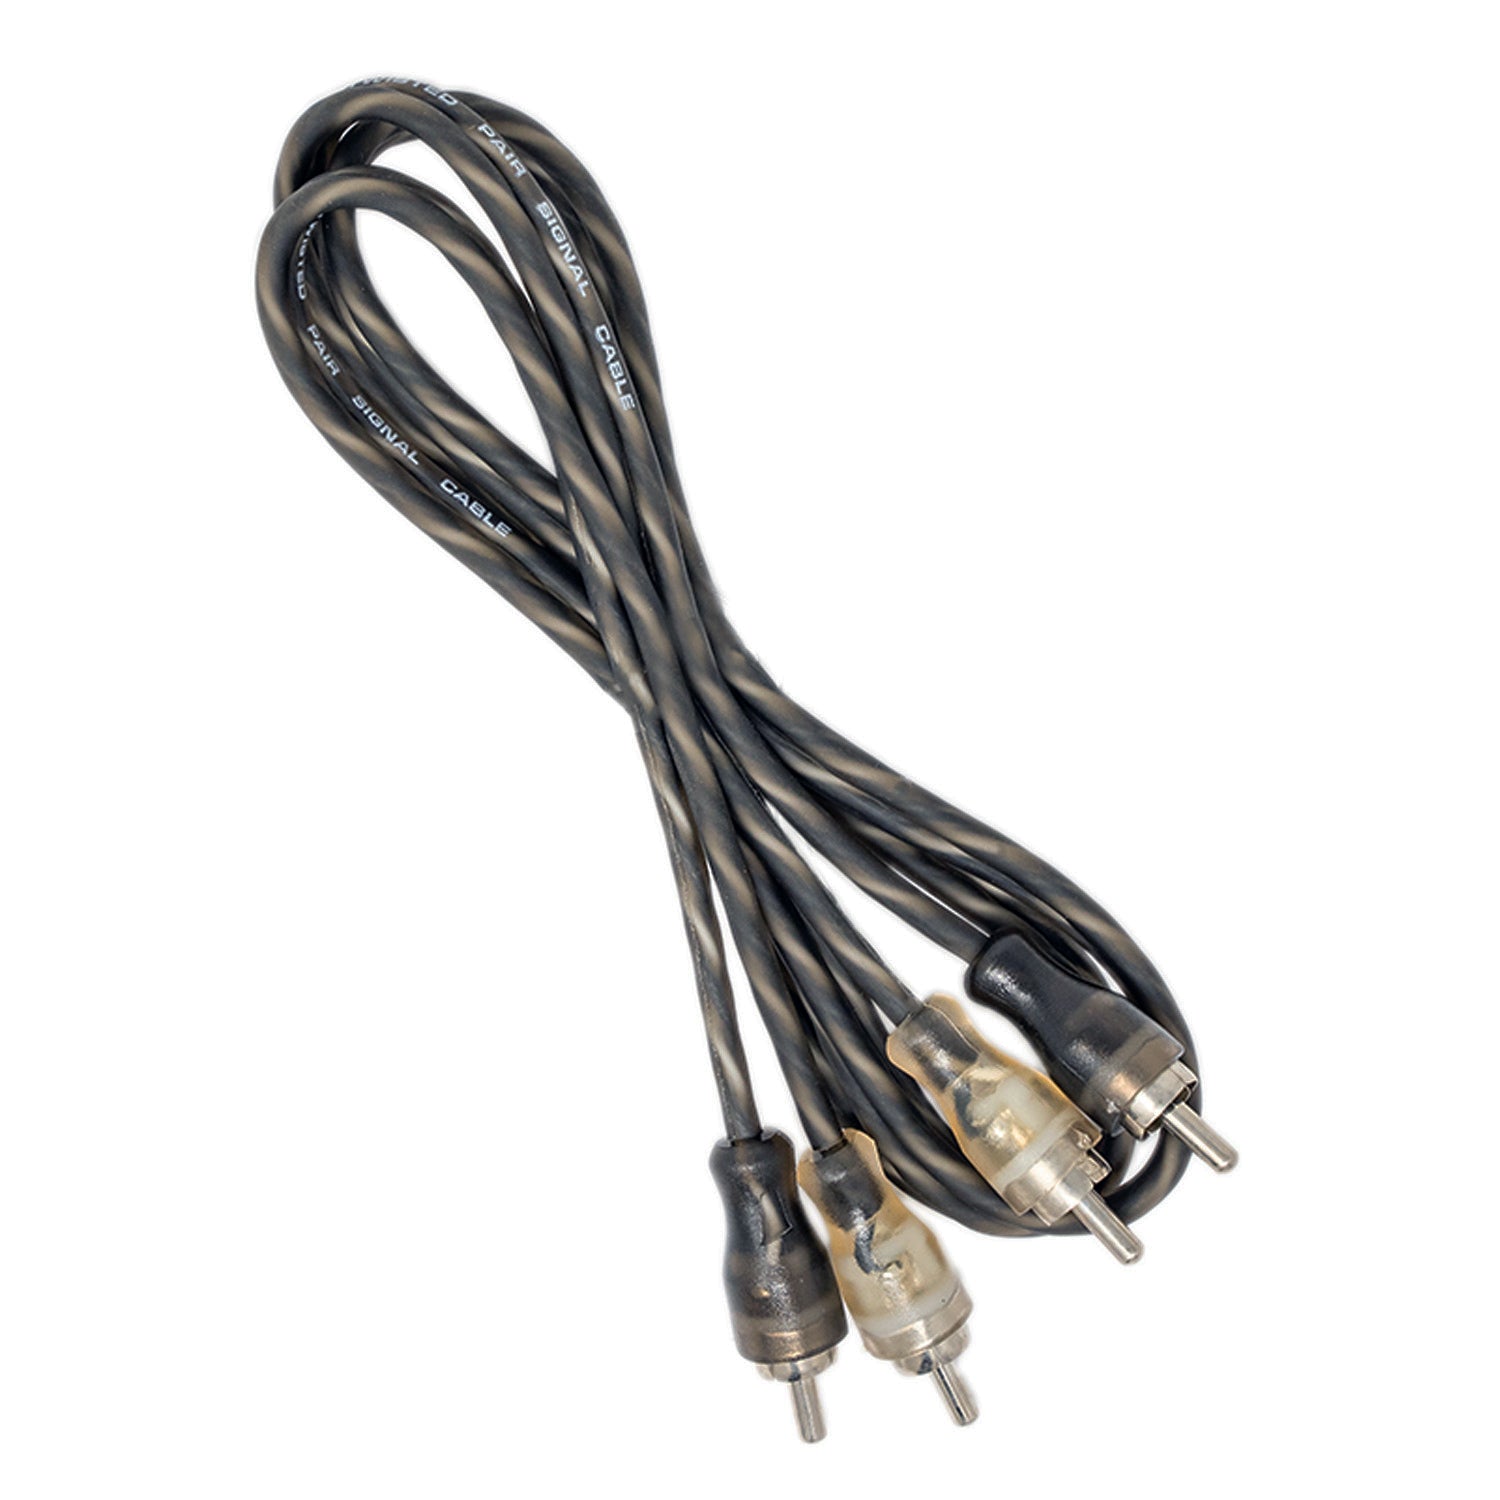 SoundBox LC-T3, Twisted Pair RCA Interconnect Cable, 3 Ft. - (Polybag Packaging)